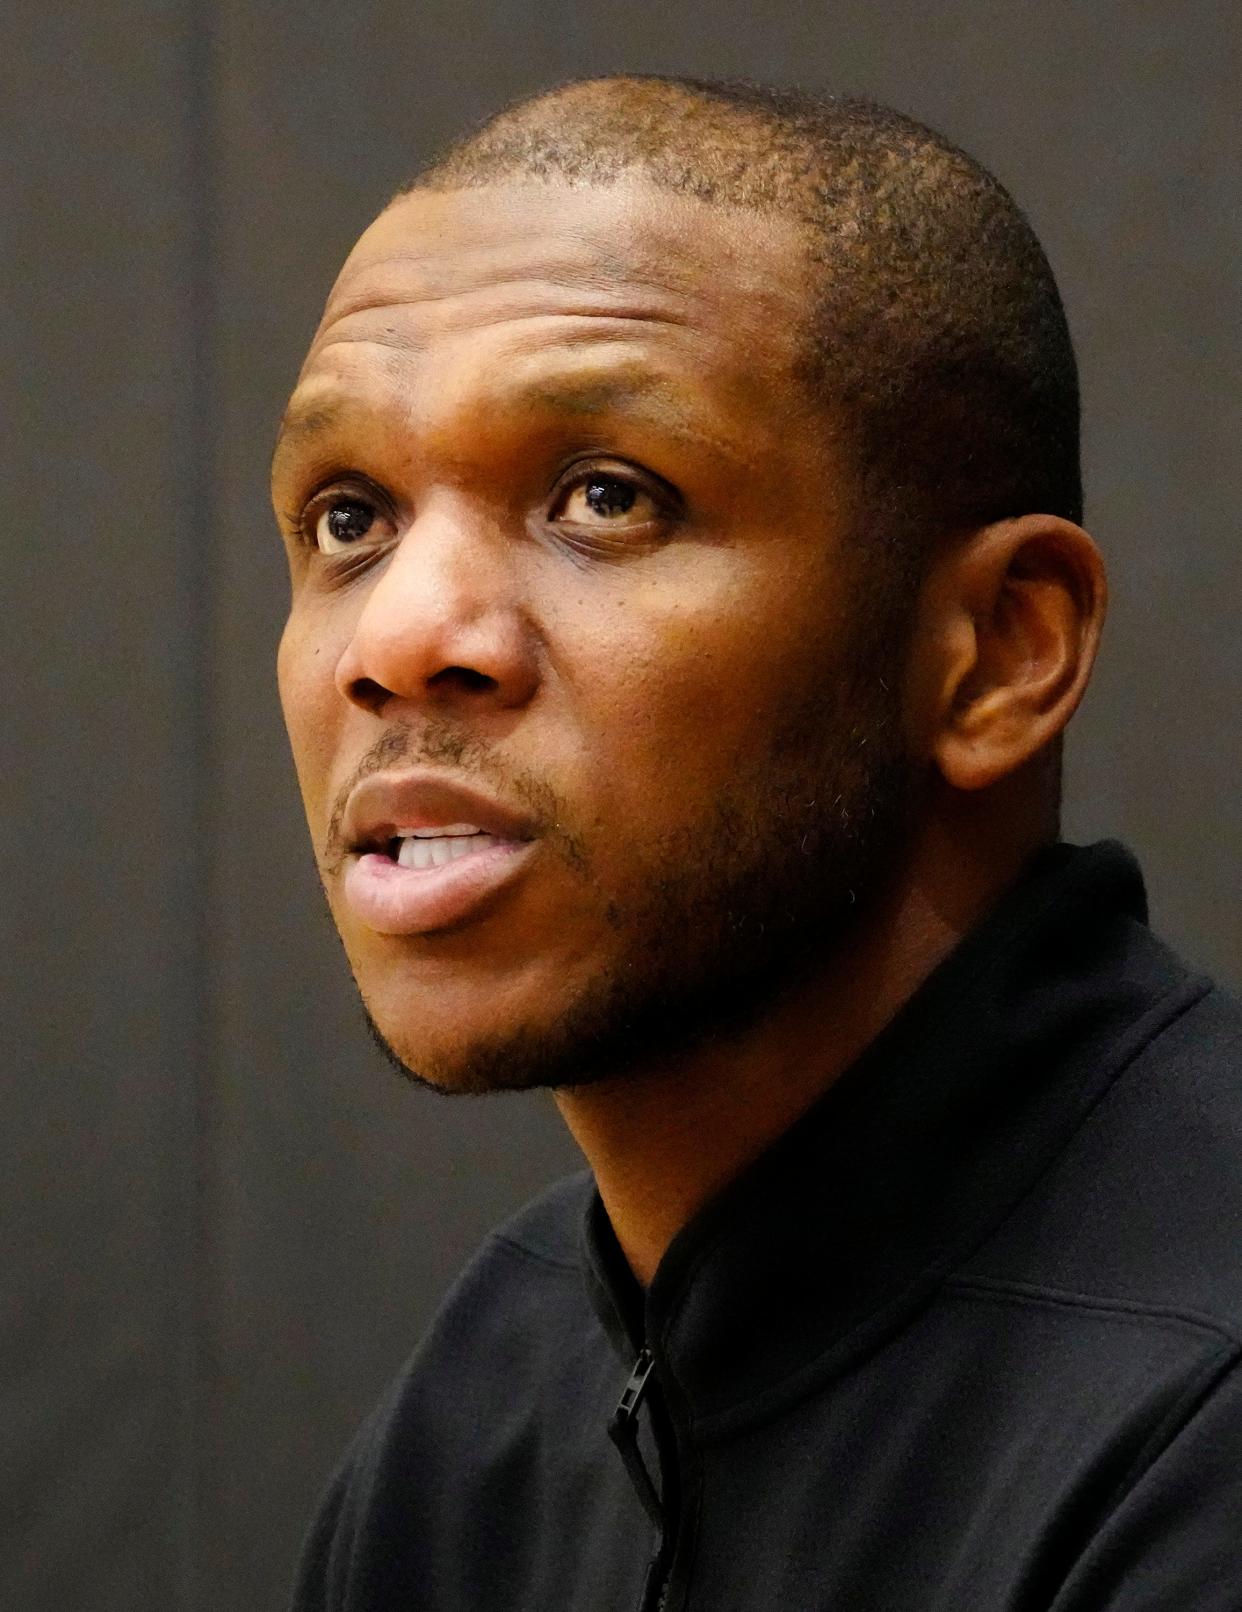 James Jones speaks about his promotion to President of Basketball Operations of the Phoenix Suns at Verizon 5G Performance Center in Phoenix on Nov. 29, 2022.